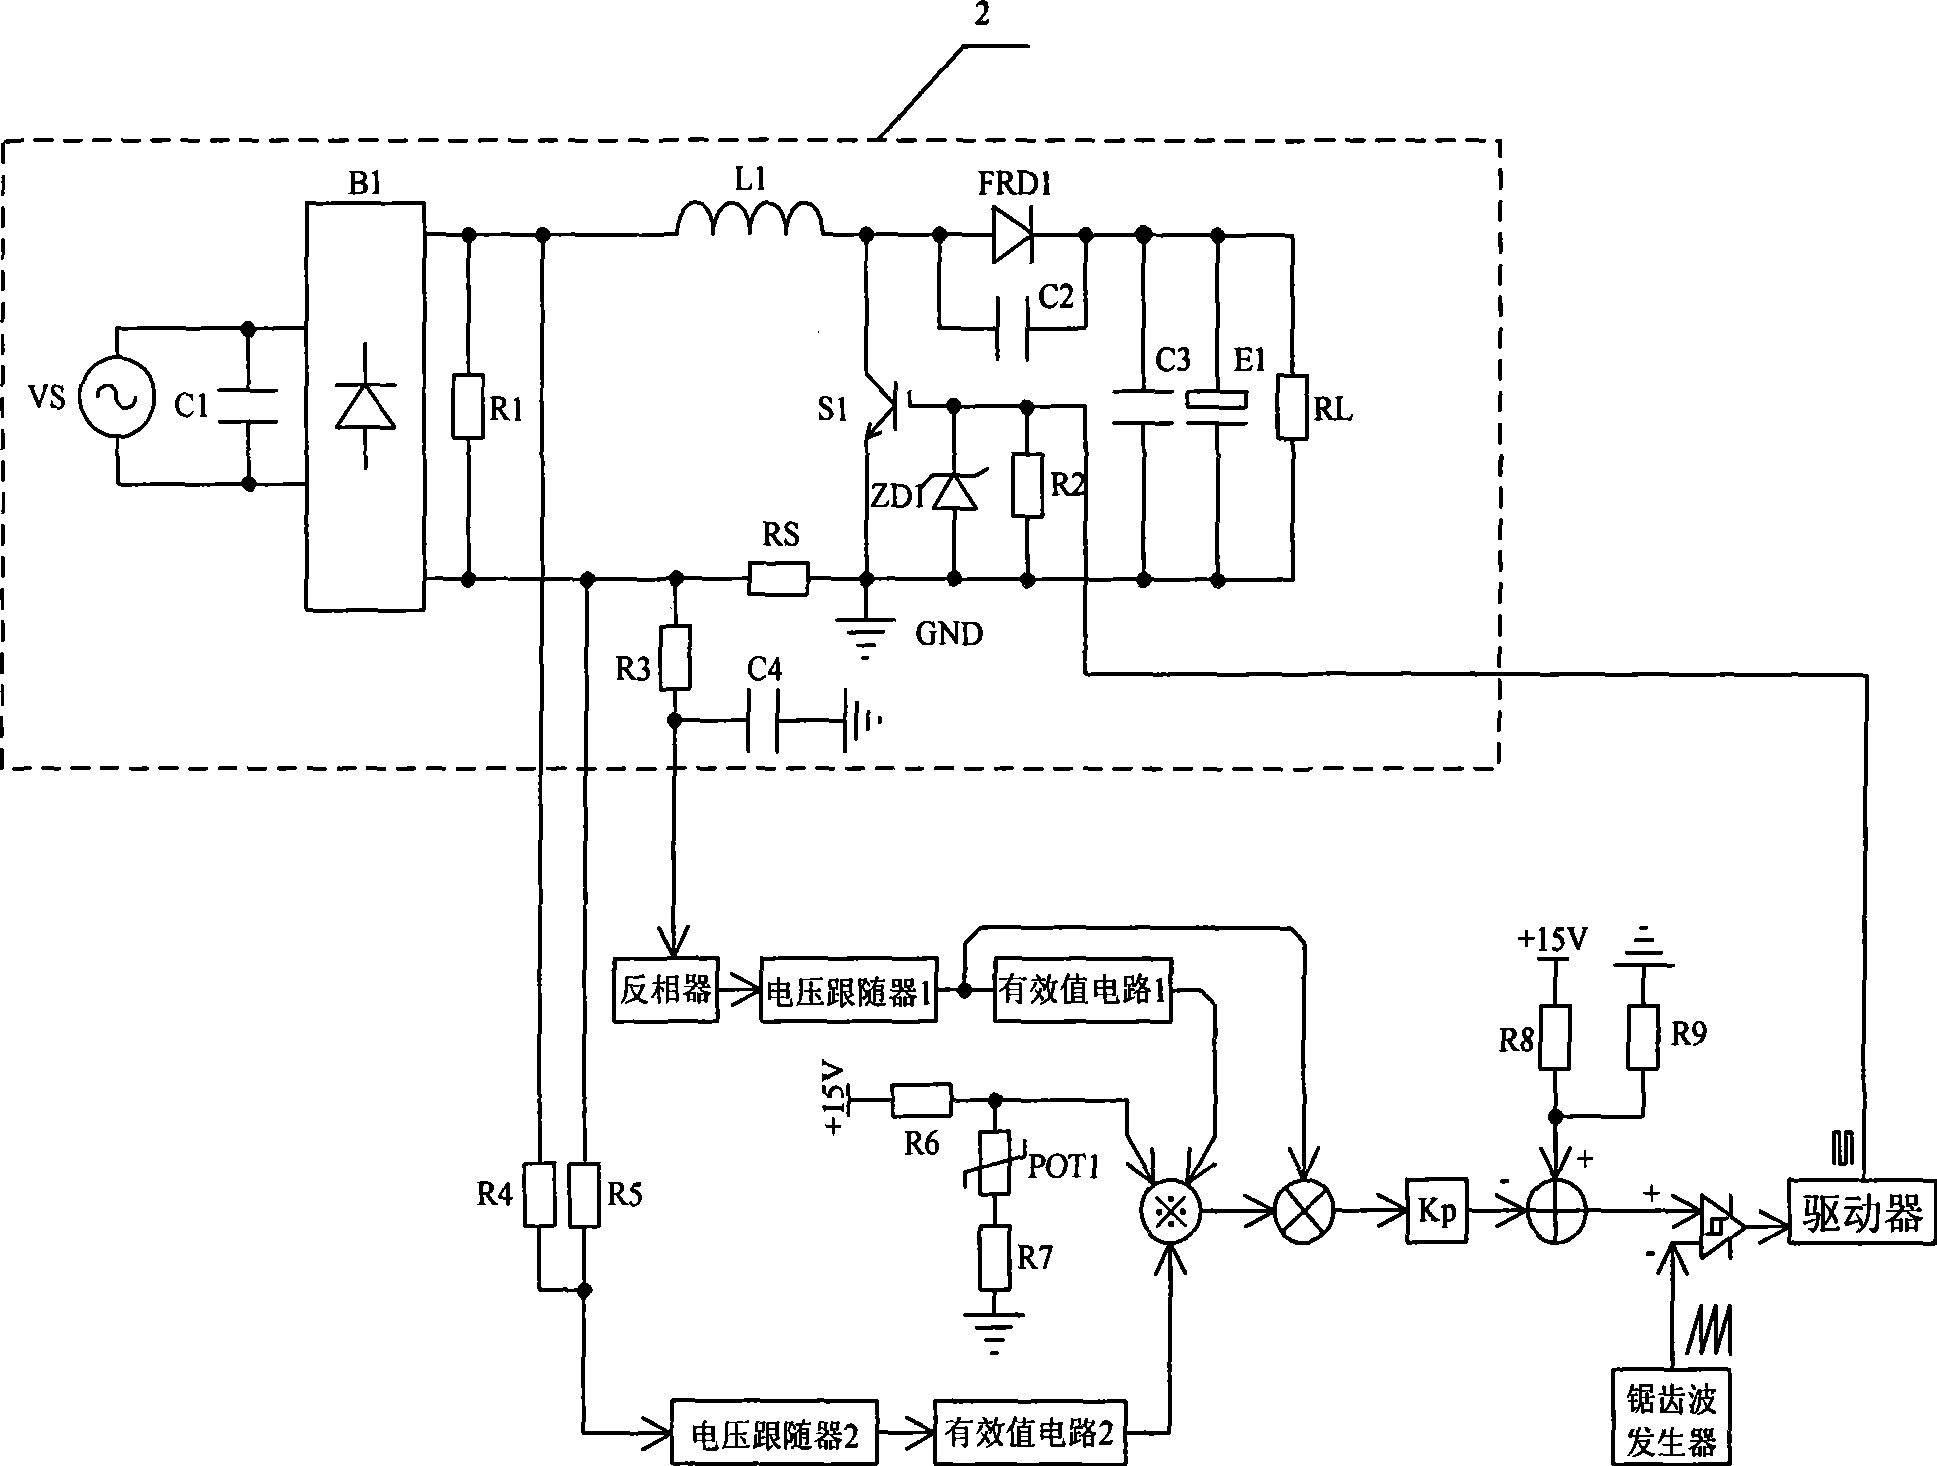 Single phase power factor correcting analog circuit without need of detecting DC output voltage